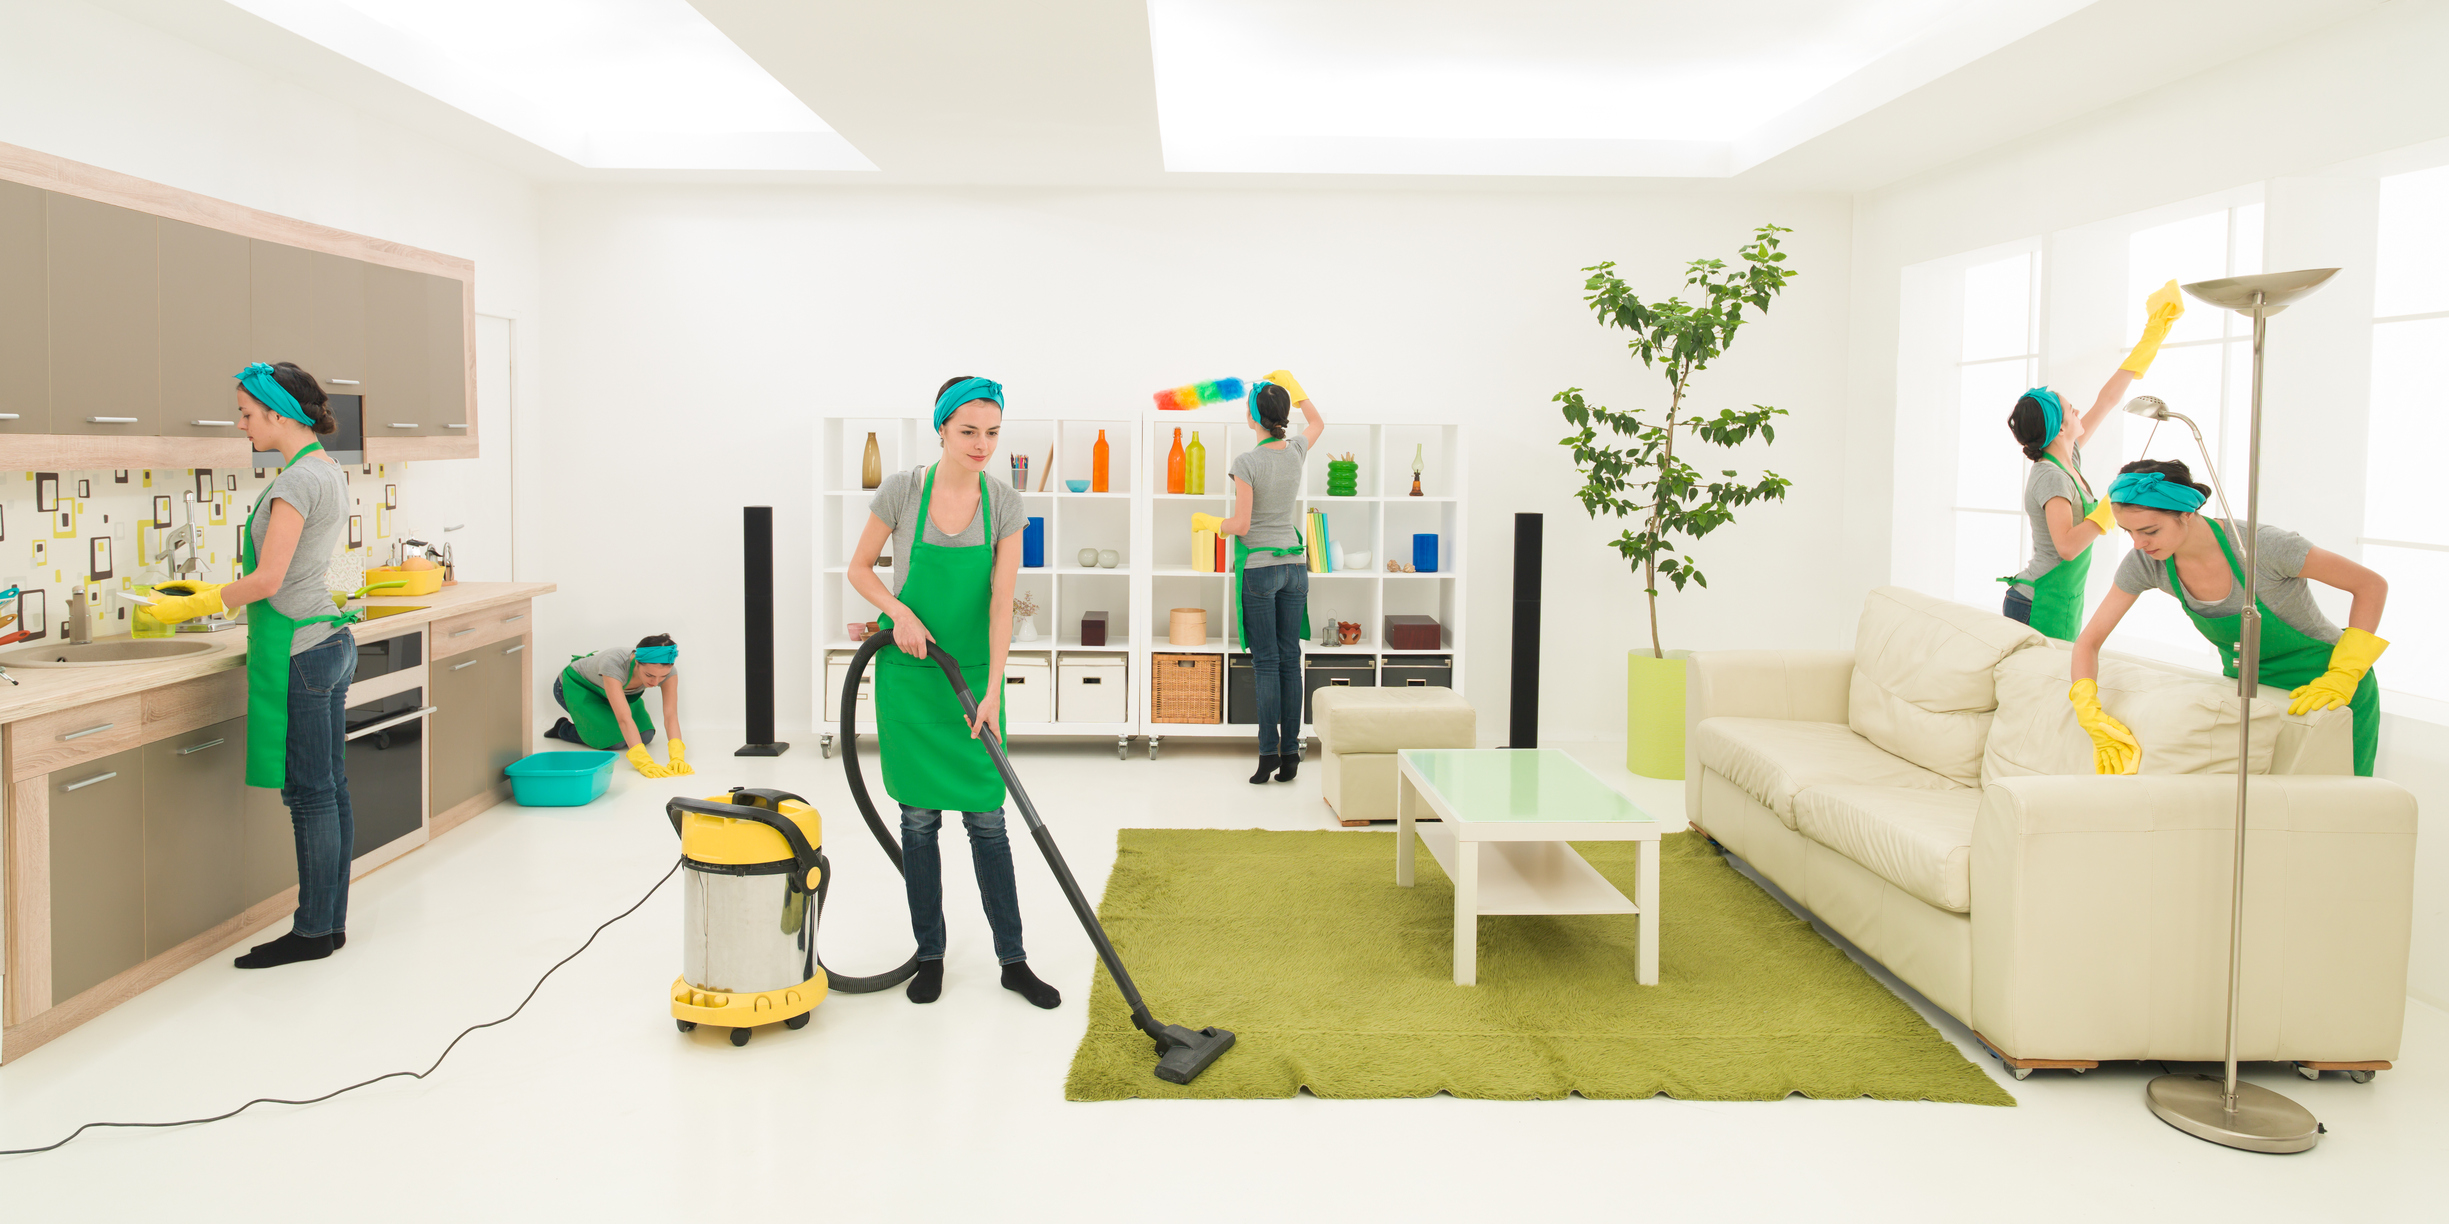 House Cleaning Service